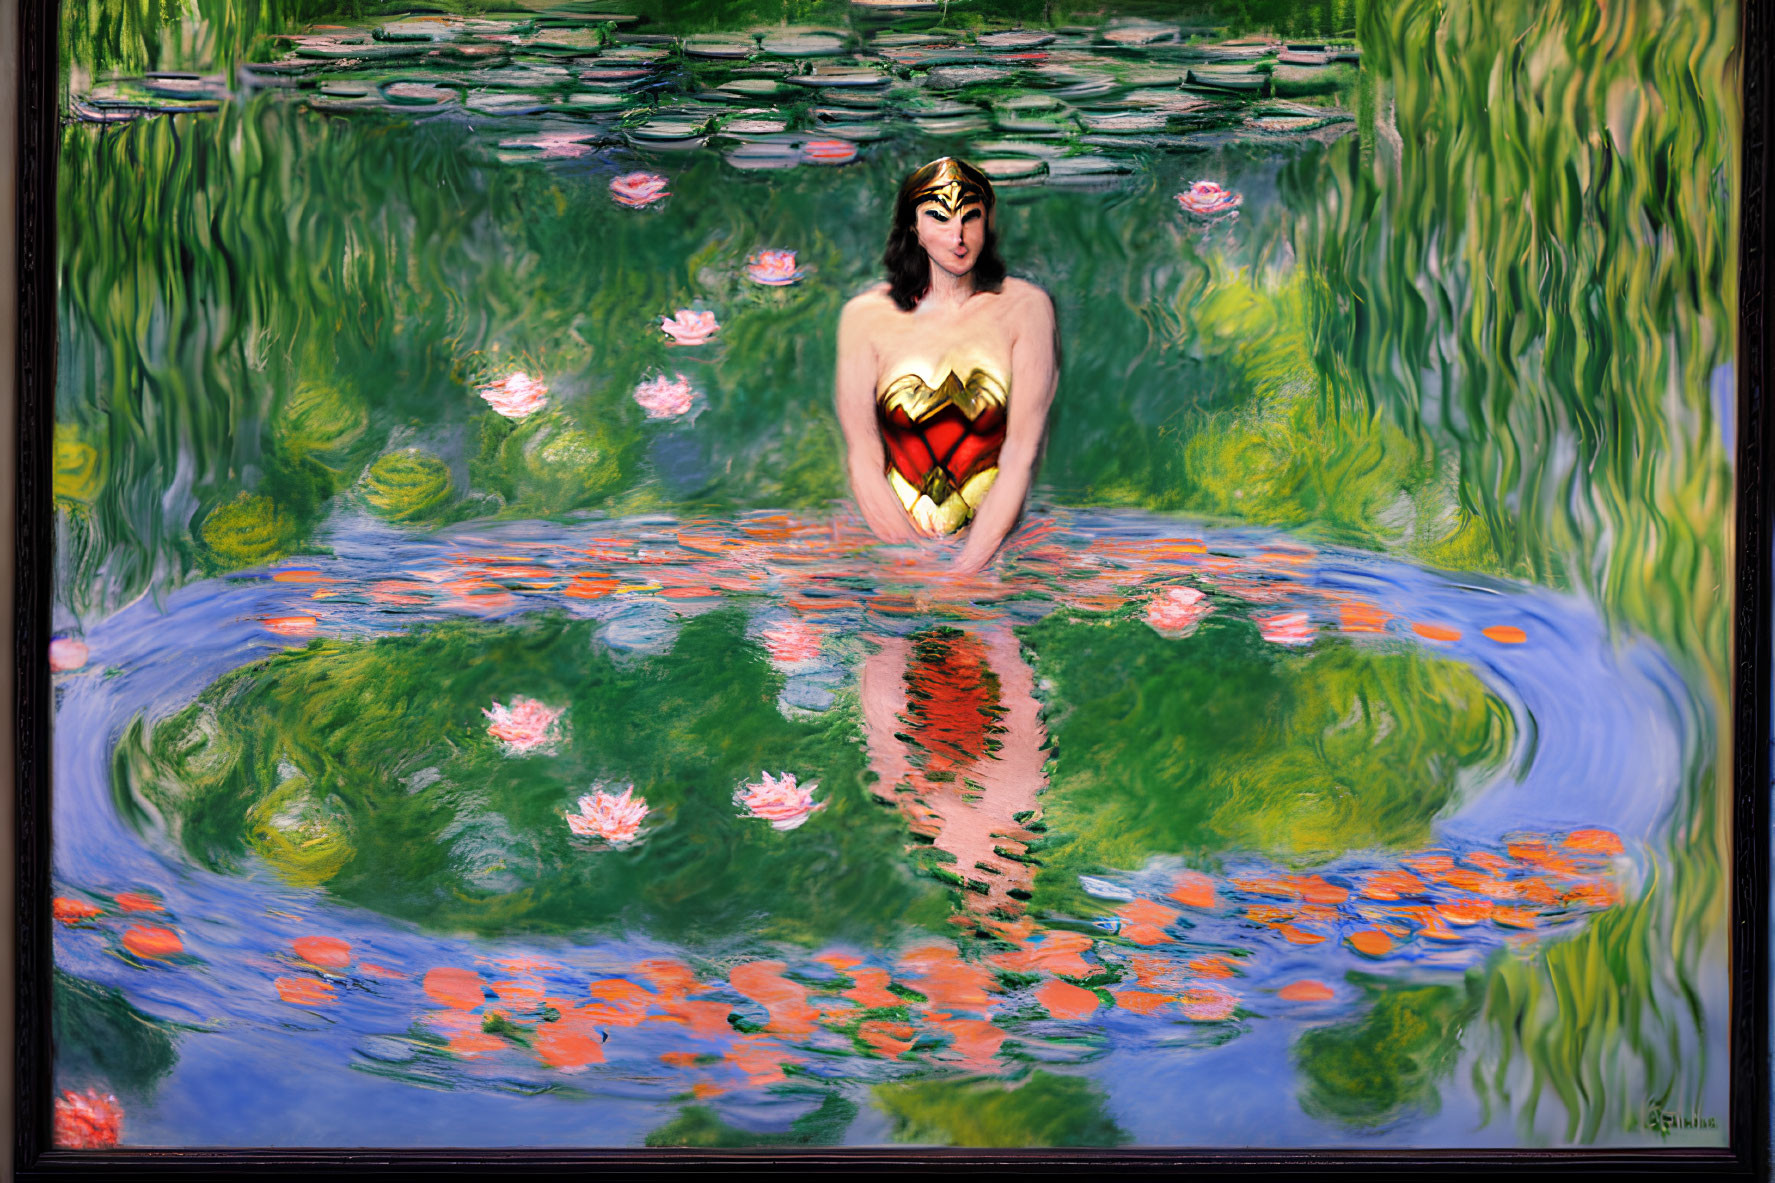 Wonder Woman costume emerges from Monet-style pond painting